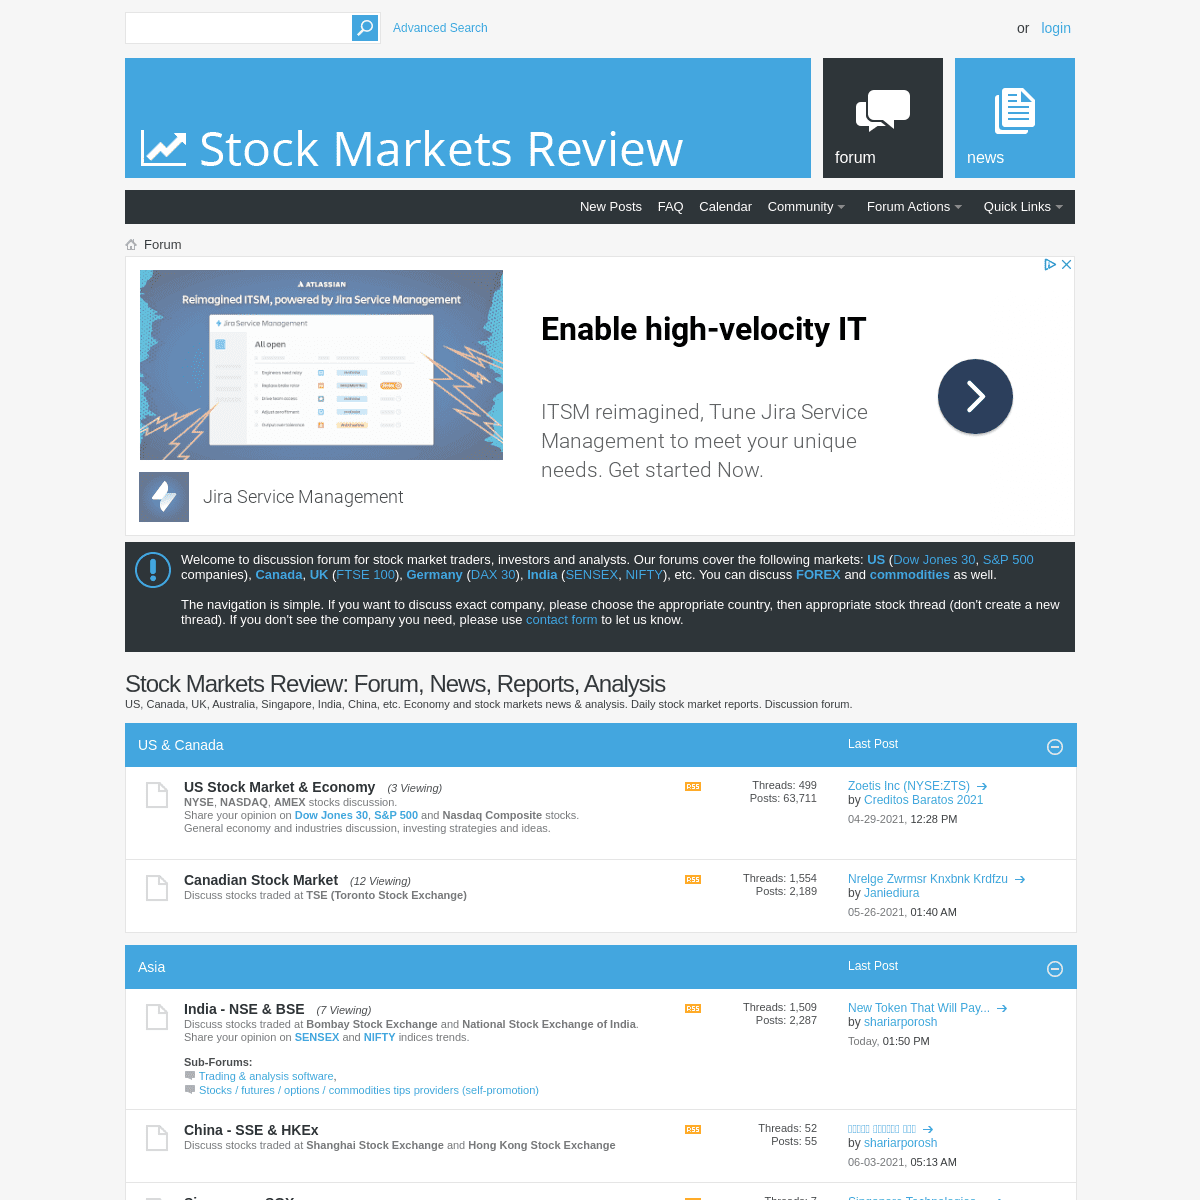 A complete backup of https://stockmarketsreview.com